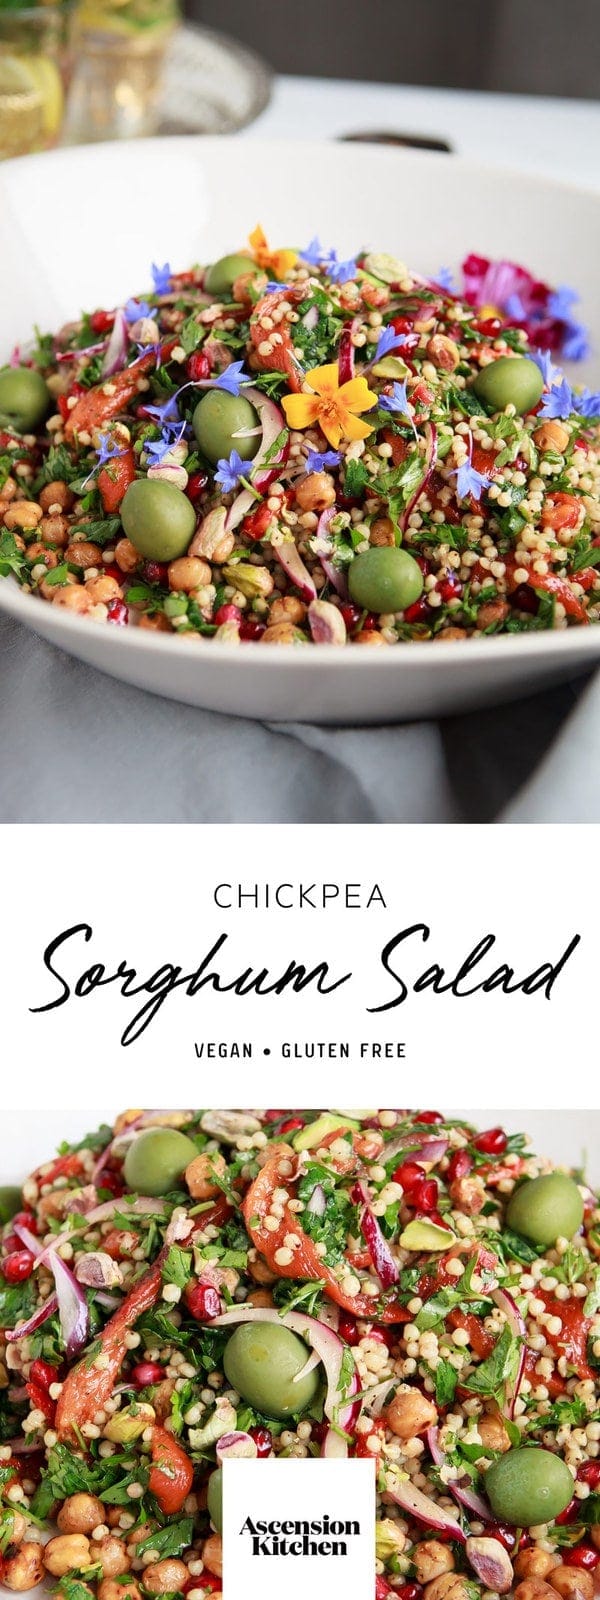 Chickpea Sorghum Salad with fresh herbs and spices. A vegan and gluten free recipe. #sorghumsalad #sorghumsaladglutenfree #sorghumsaladgrains #sorghumsaladvegan #sorghumsaladrecipes #sorghumrecipes #sorghumrecipesdinner #sorghumrecipeshealthy #sorghumrecipesvegan #sorghumrecipessalad #sorghumrecipeshowtomake #AscensionKitchen // Pin to your own inspiration board! //